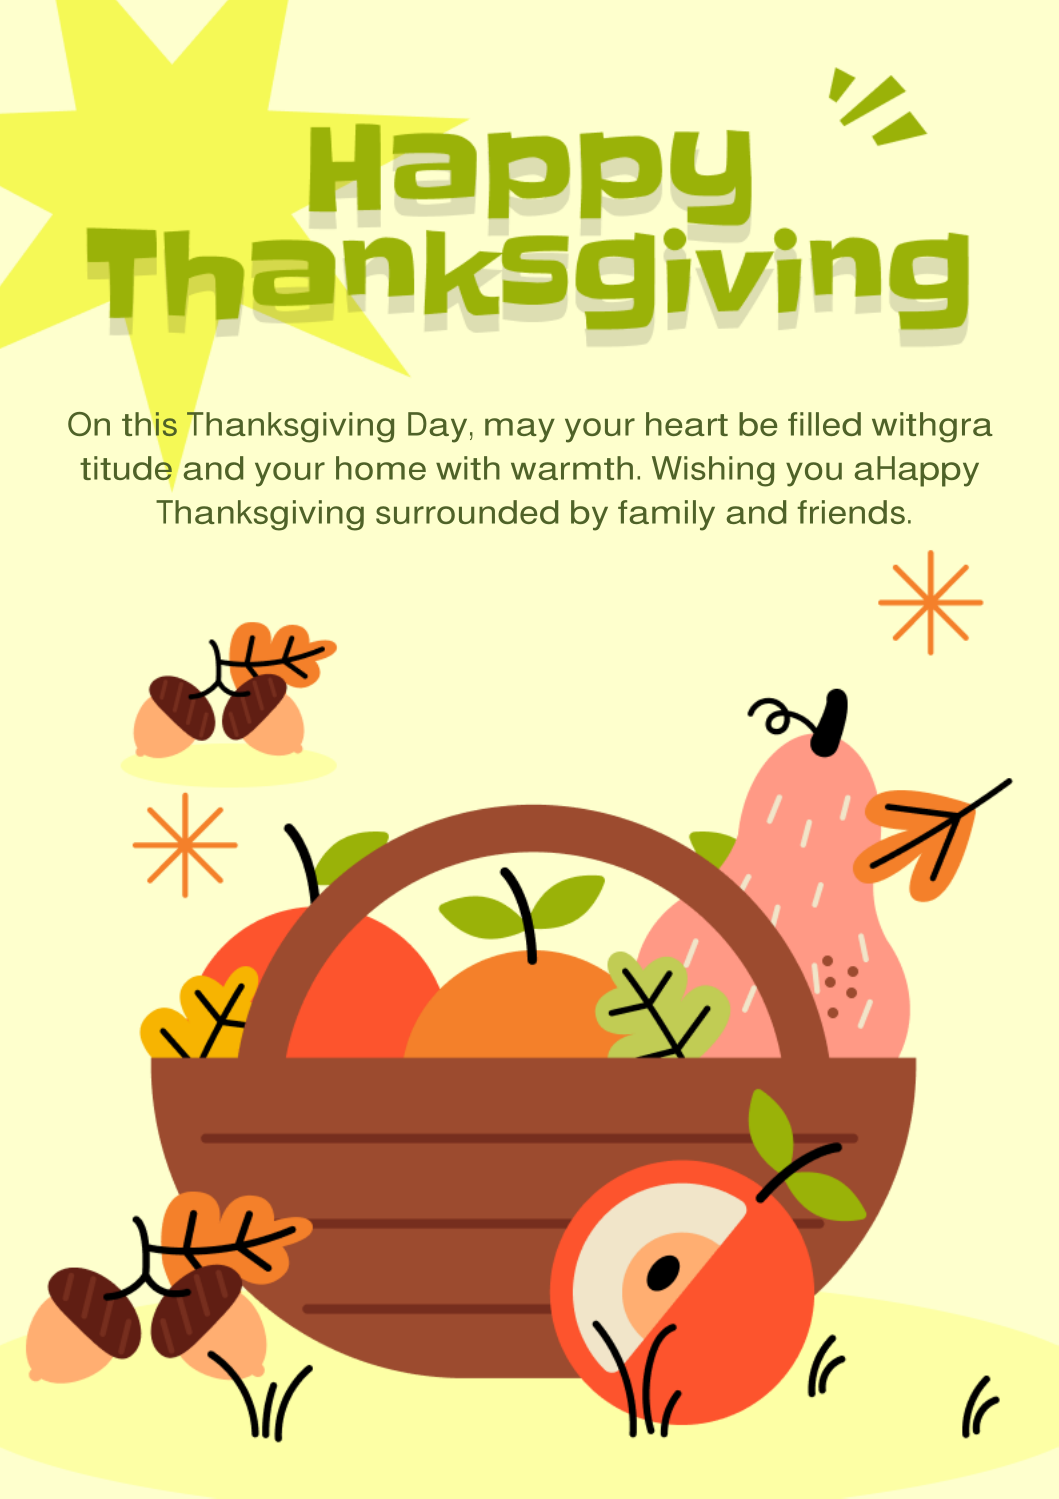 Thankgiving messages to employees